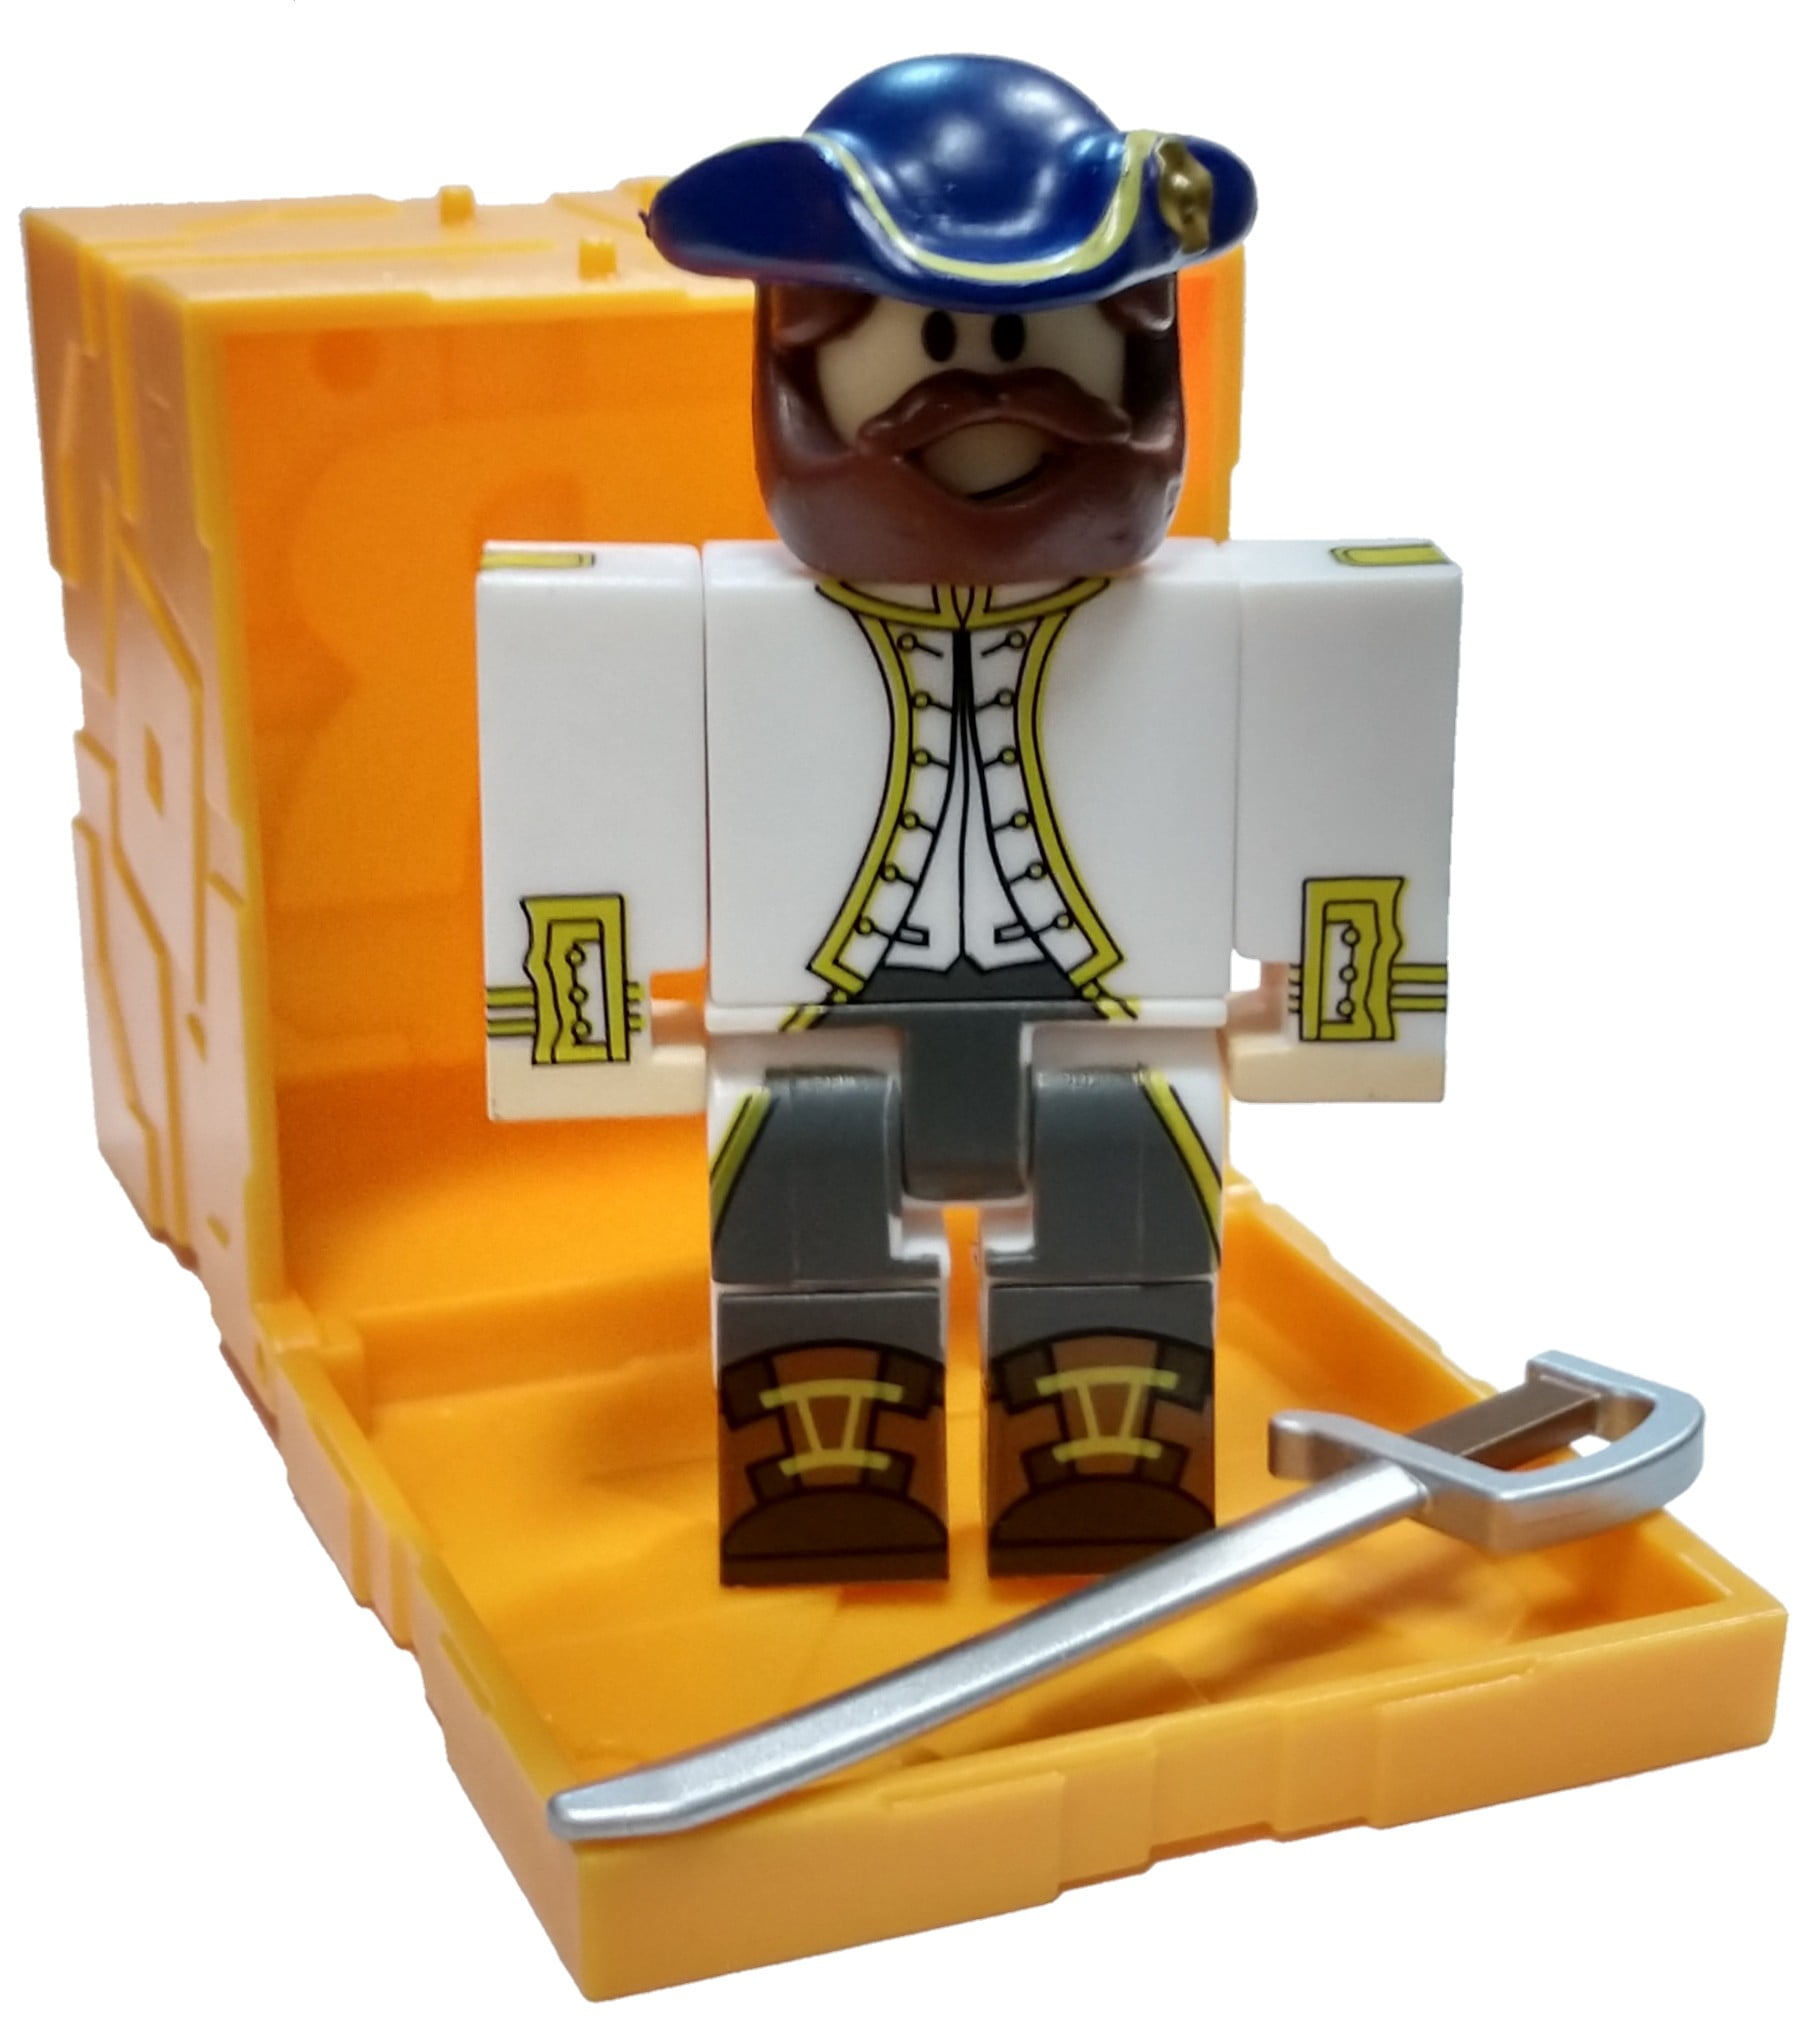 Roblox Series 5 Tradelands Whitecrest Admiral Mini Figure With Gold Cube And Online Code No Packaging Walmart Com Walmart Com - roblox rides with google hq with dj stand roblox